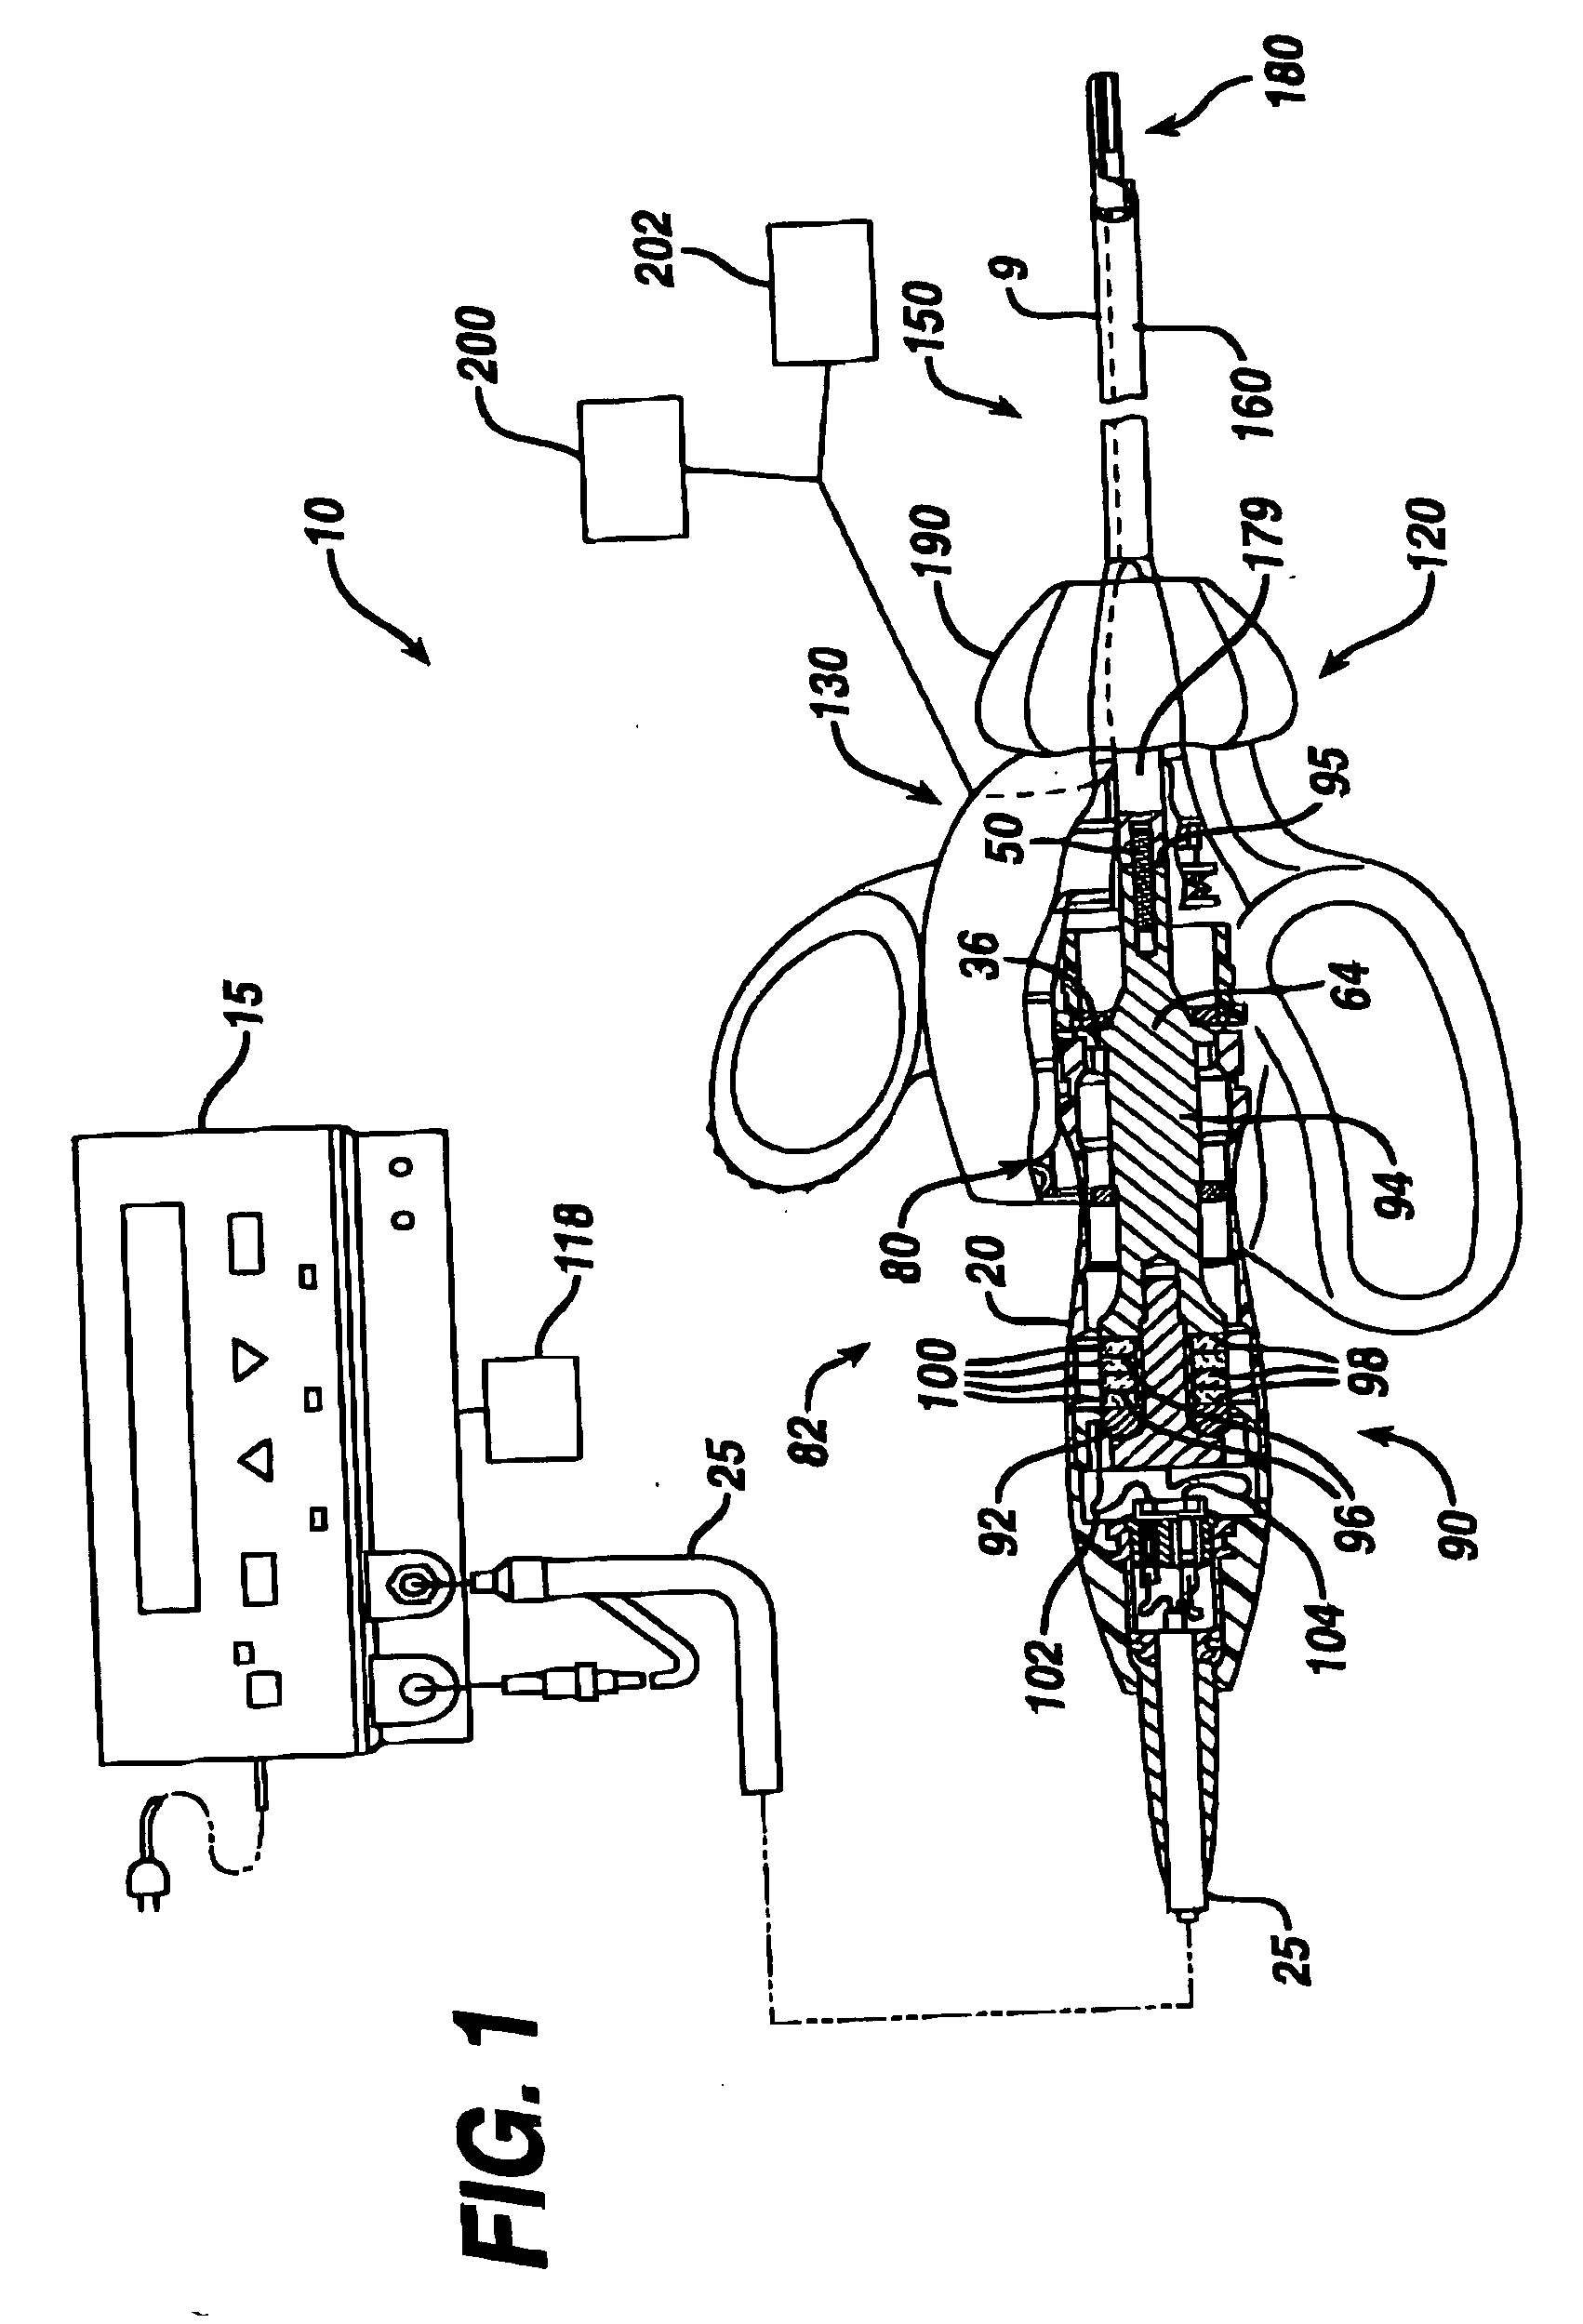 Ultrasonic surgical instrument incorporating fluid management